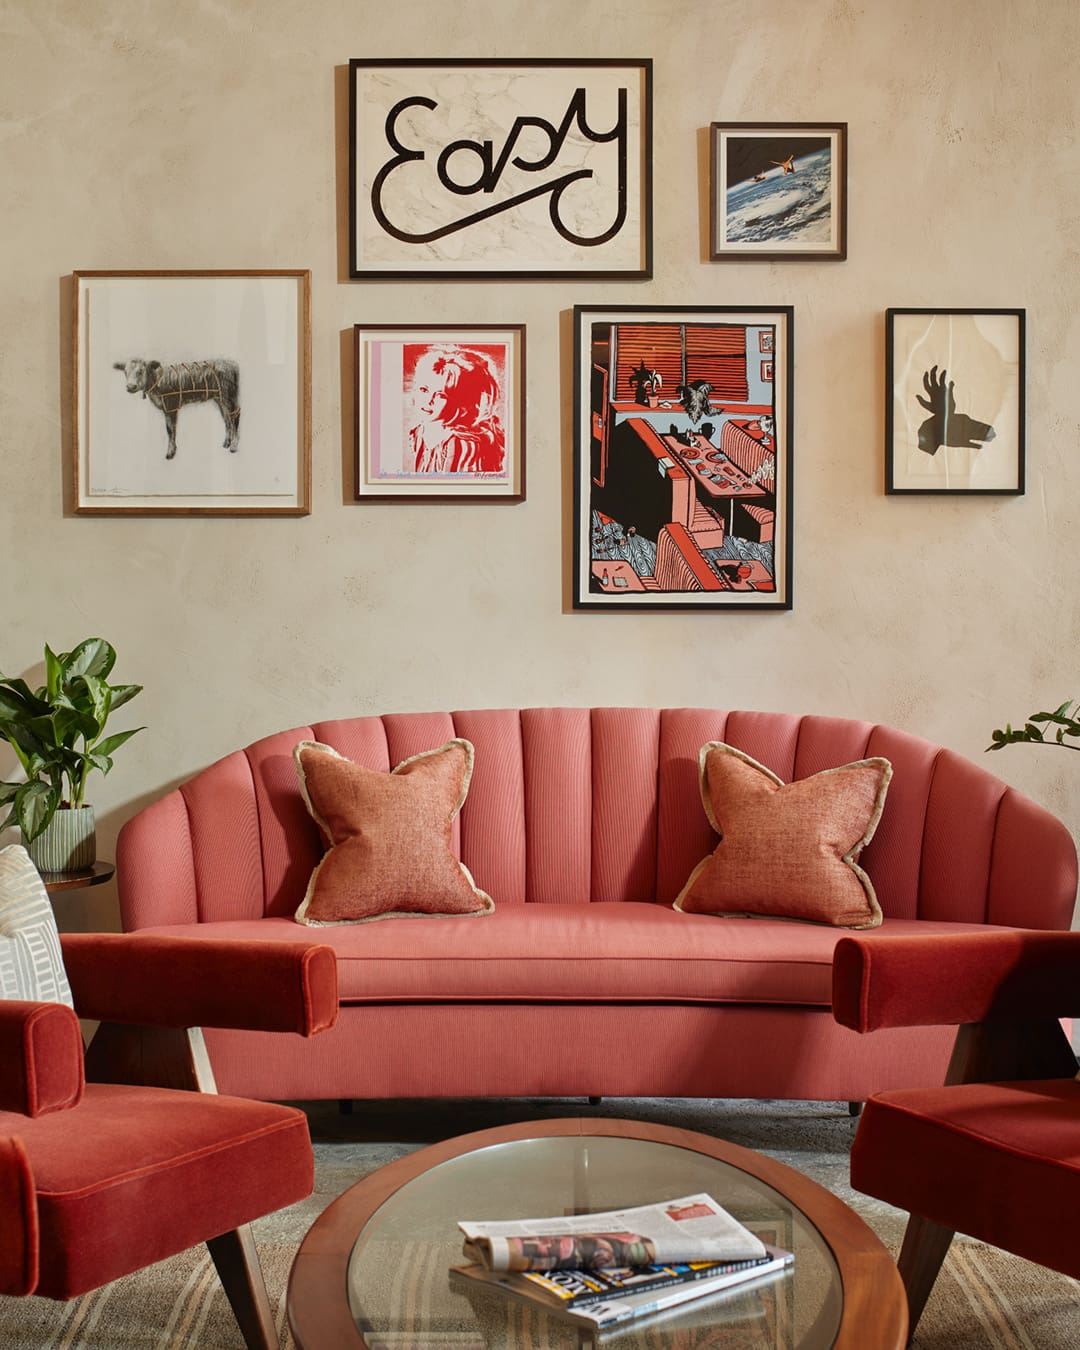 The best hotel art | a curated wall of art at The Hoxton, Shepherd's Bush